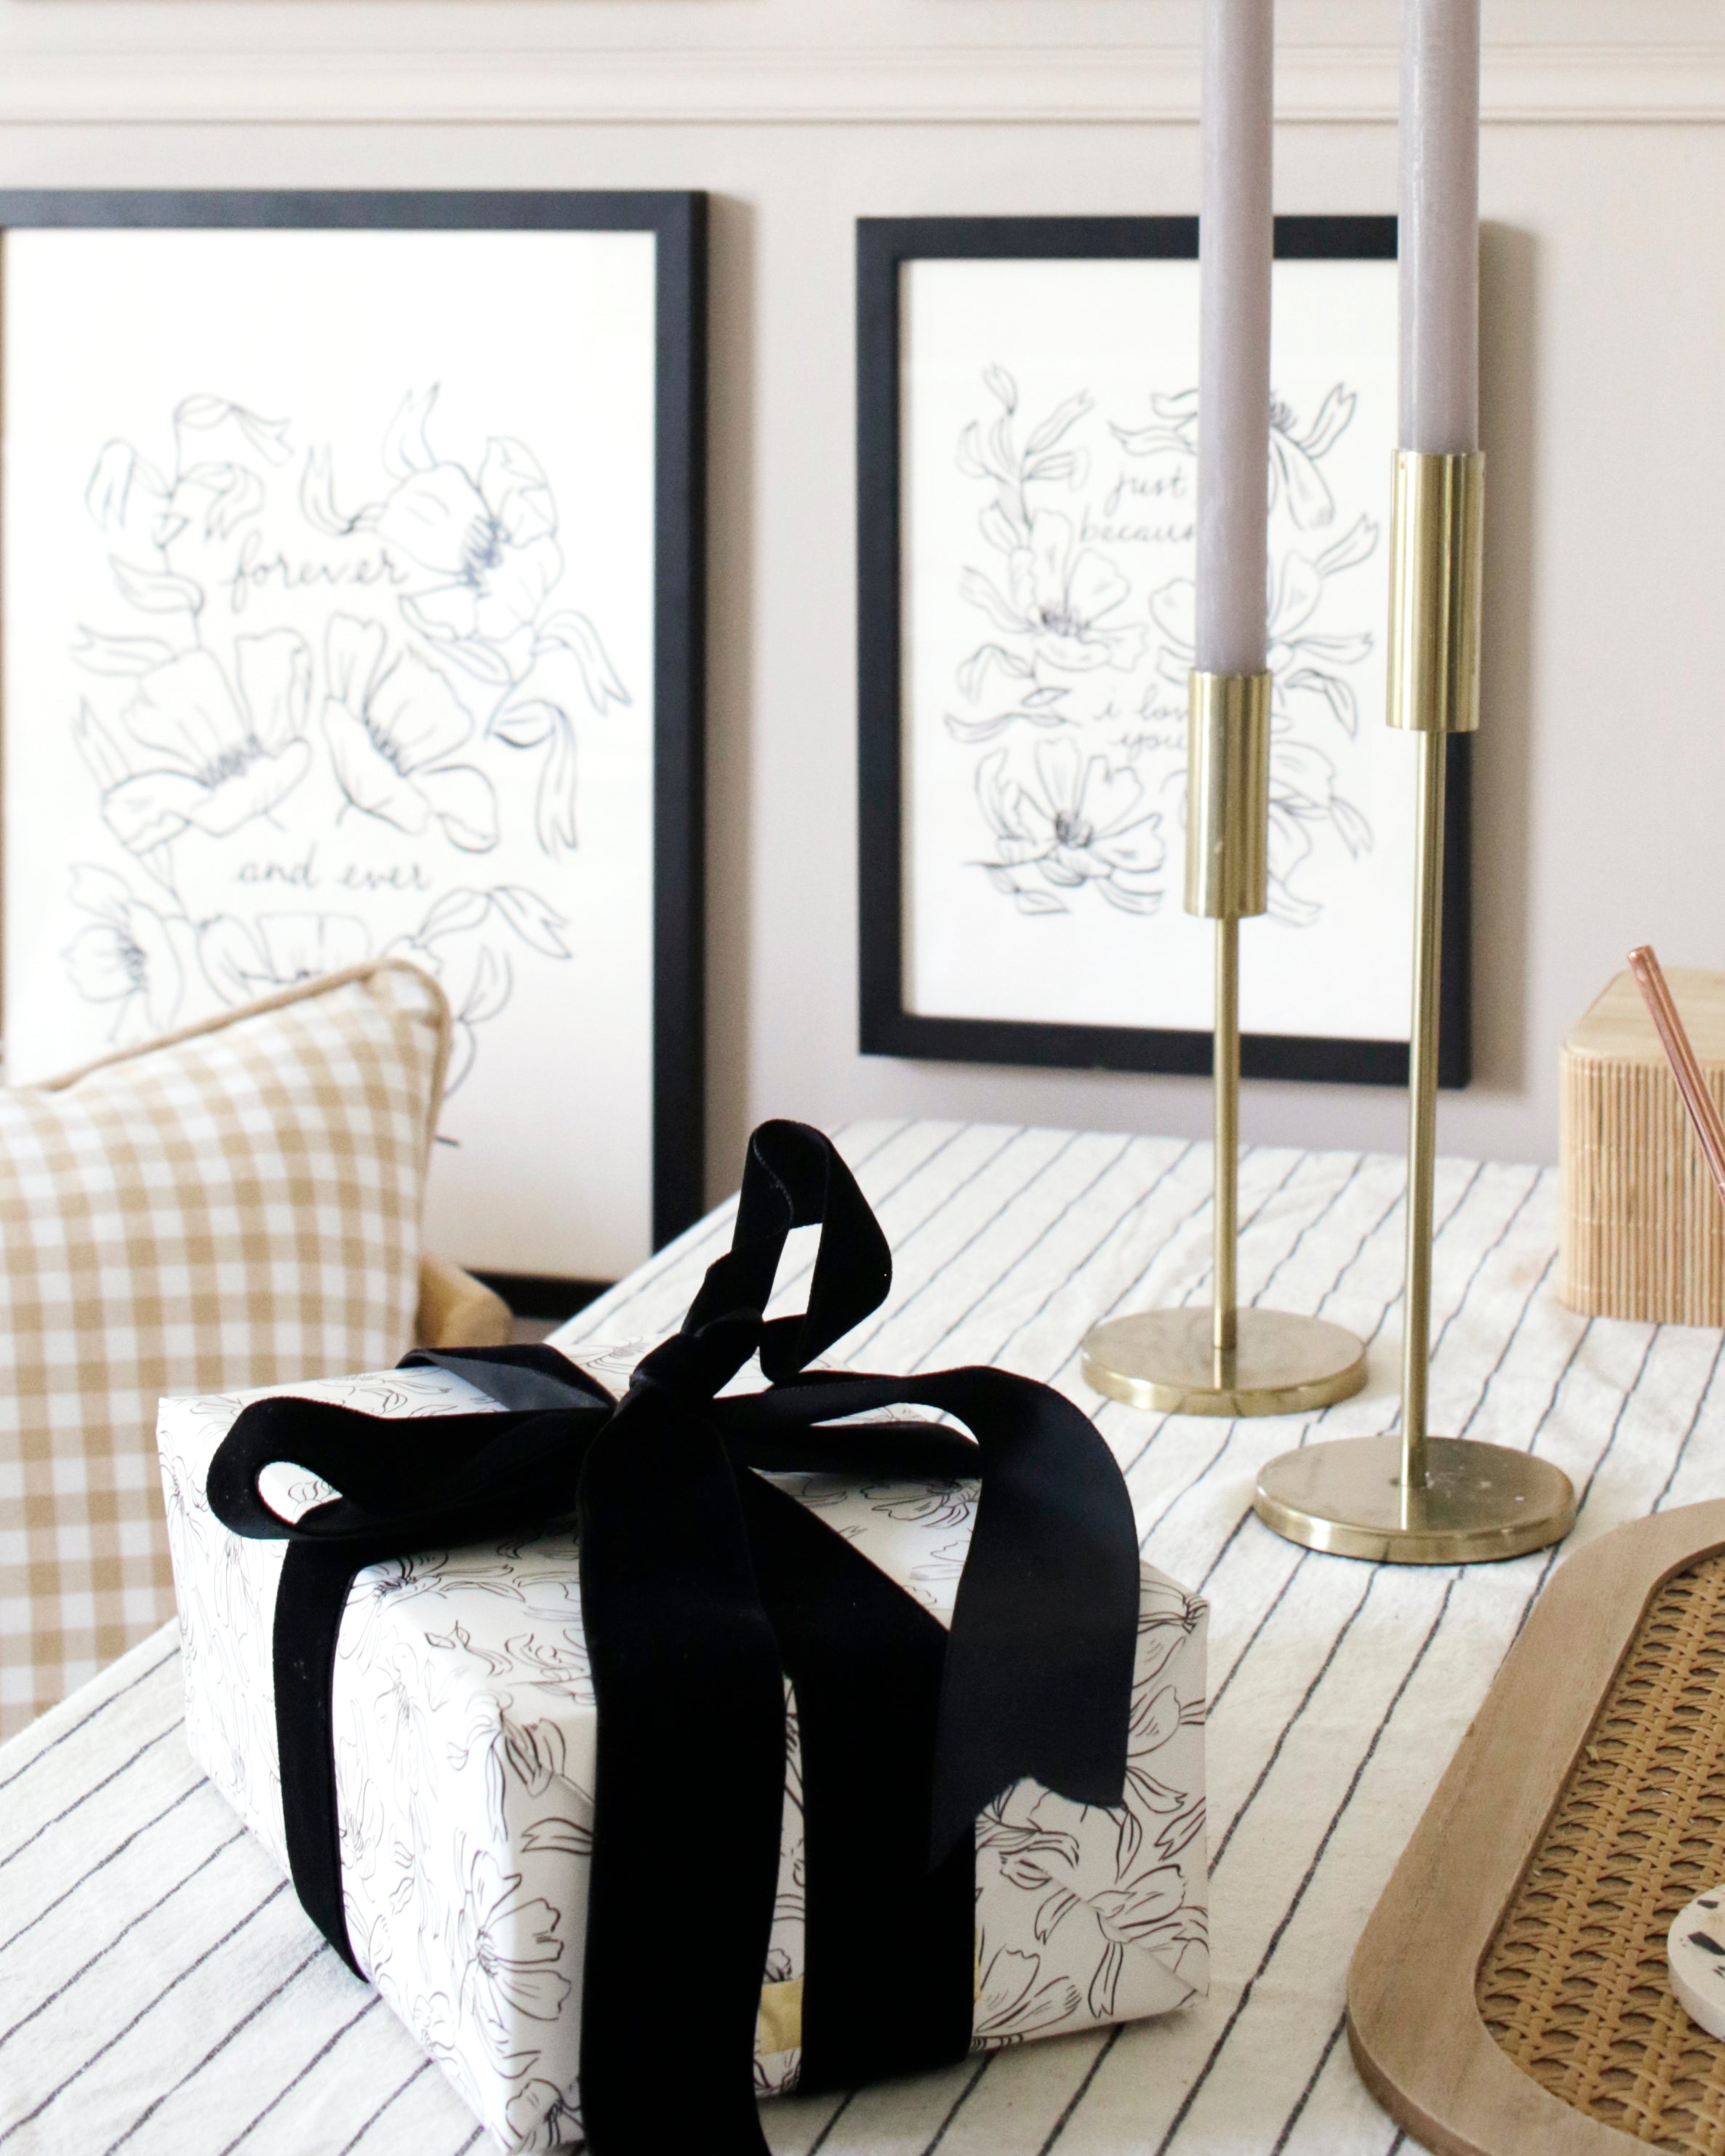 a gift wrapped in lovely, linework floral style wrapping paper, finished with a luxurious black velvet ribbon